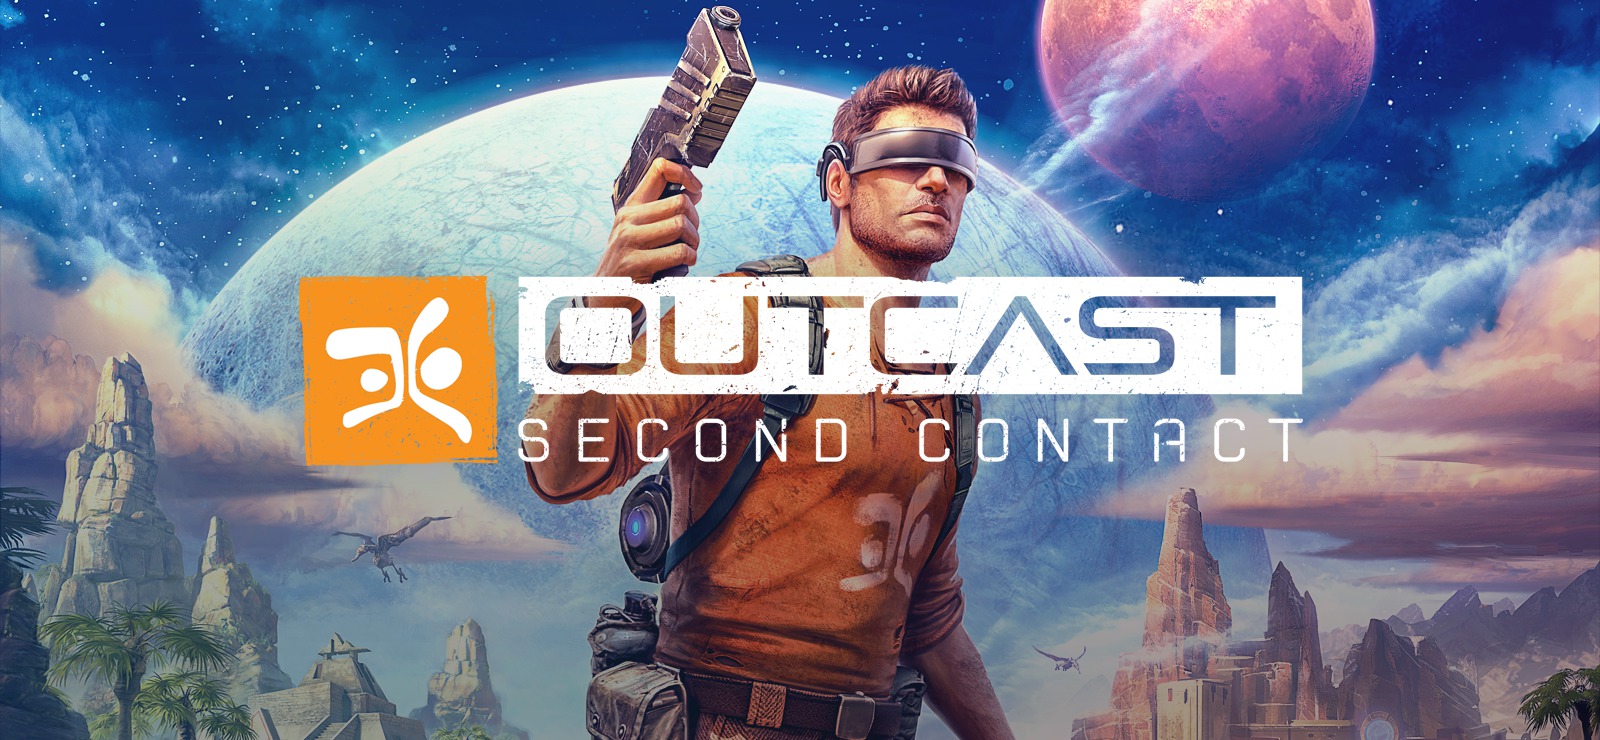 outcast second contact